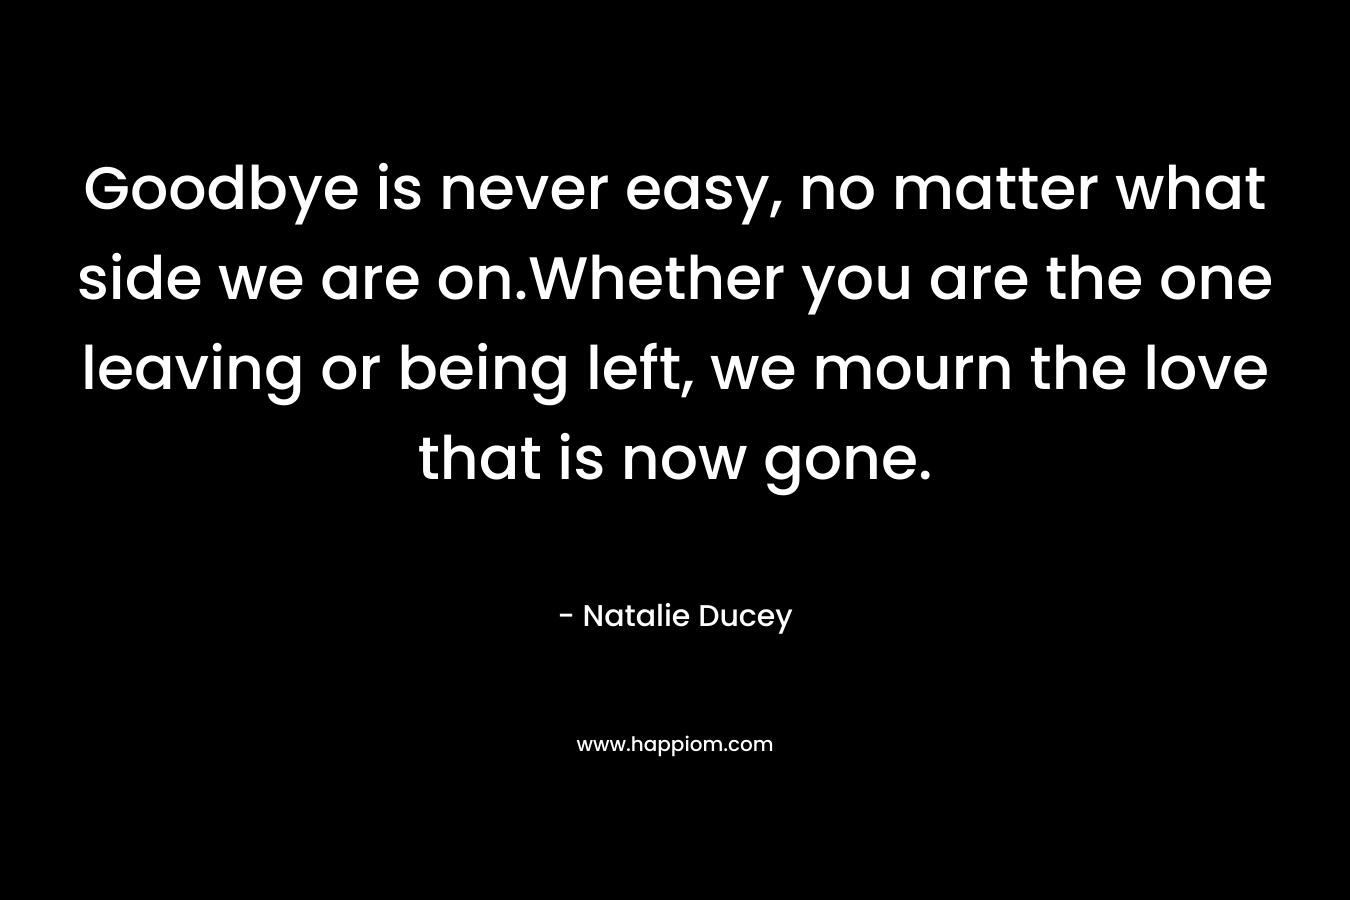 Goodbye is never easy, no matter what side we are on.Whether you are the one leaving or being left, we mourn the love that is now gone. – Natalie Ducey